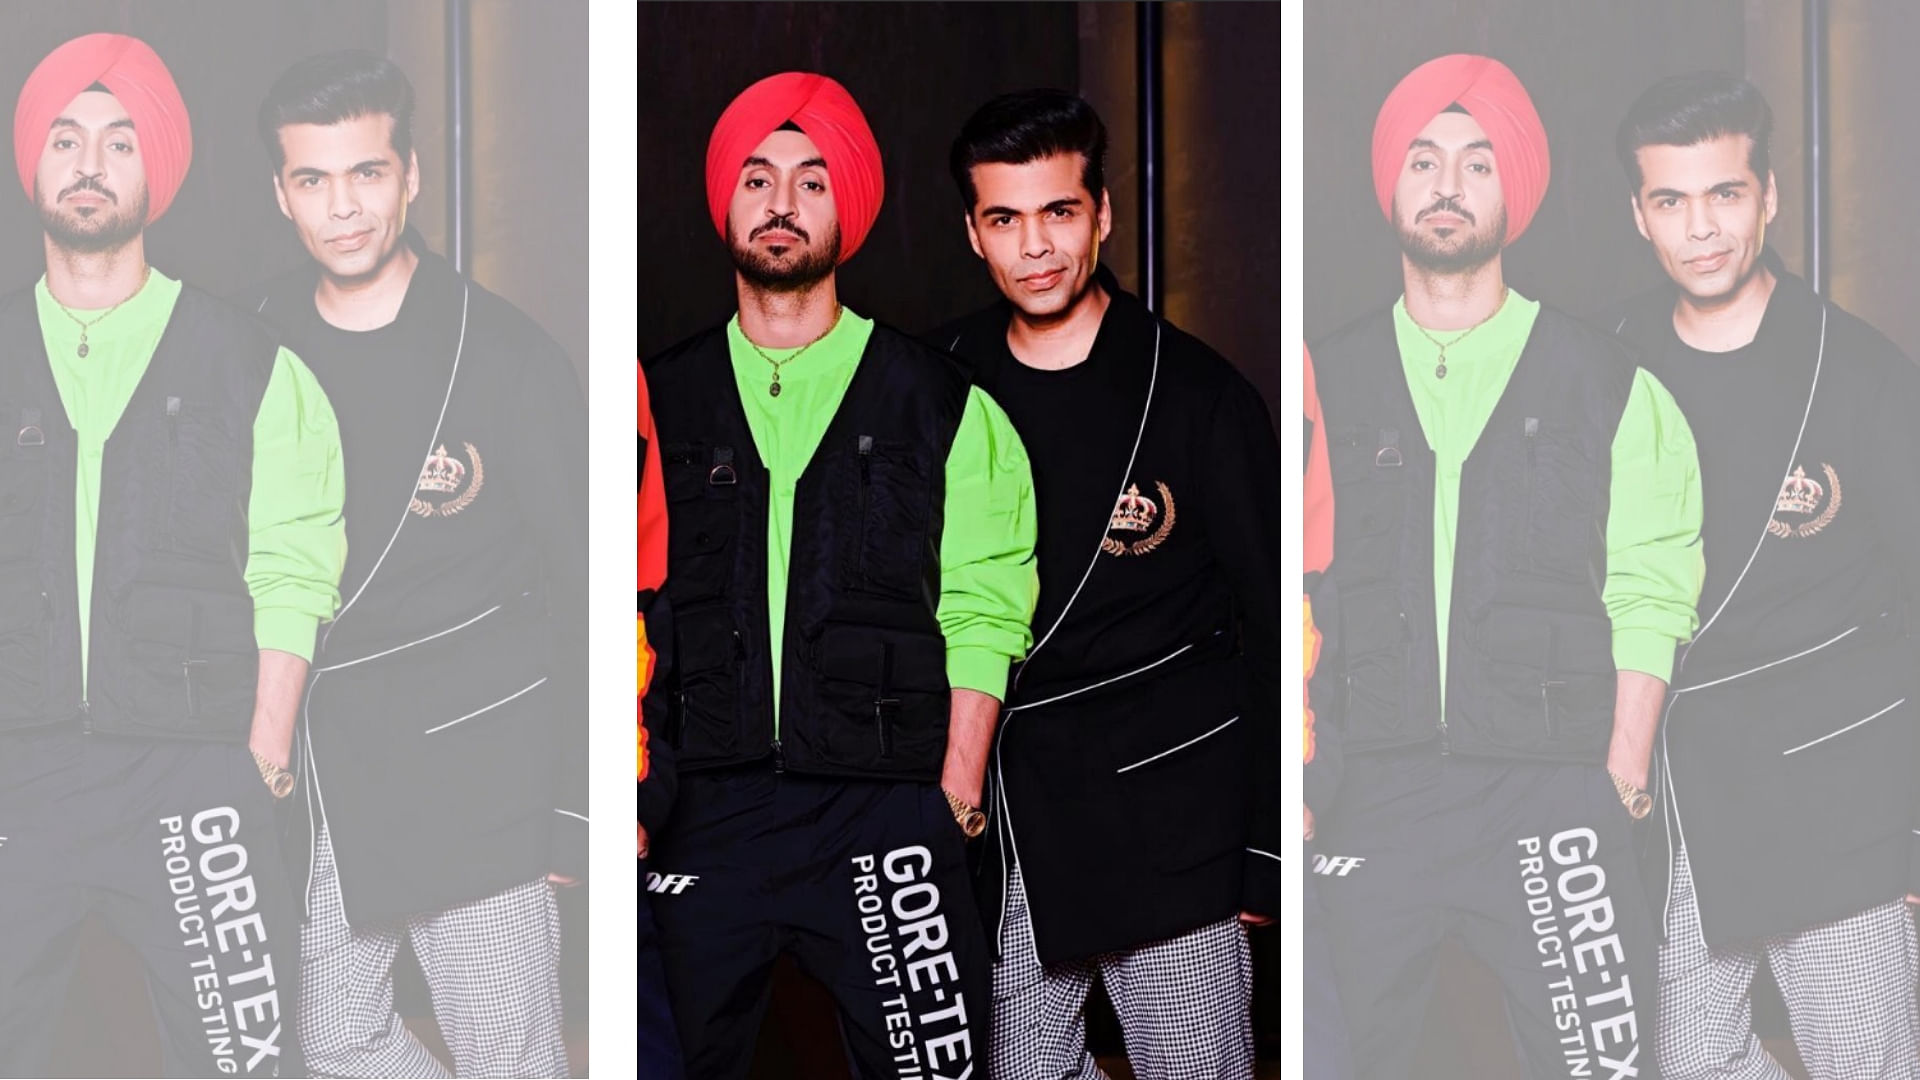 As per reports, filmmaker, producer, and talk show host Karan Johar revealed one habit of singer-actor Diljit Dosanjh that is driving him up the wall.